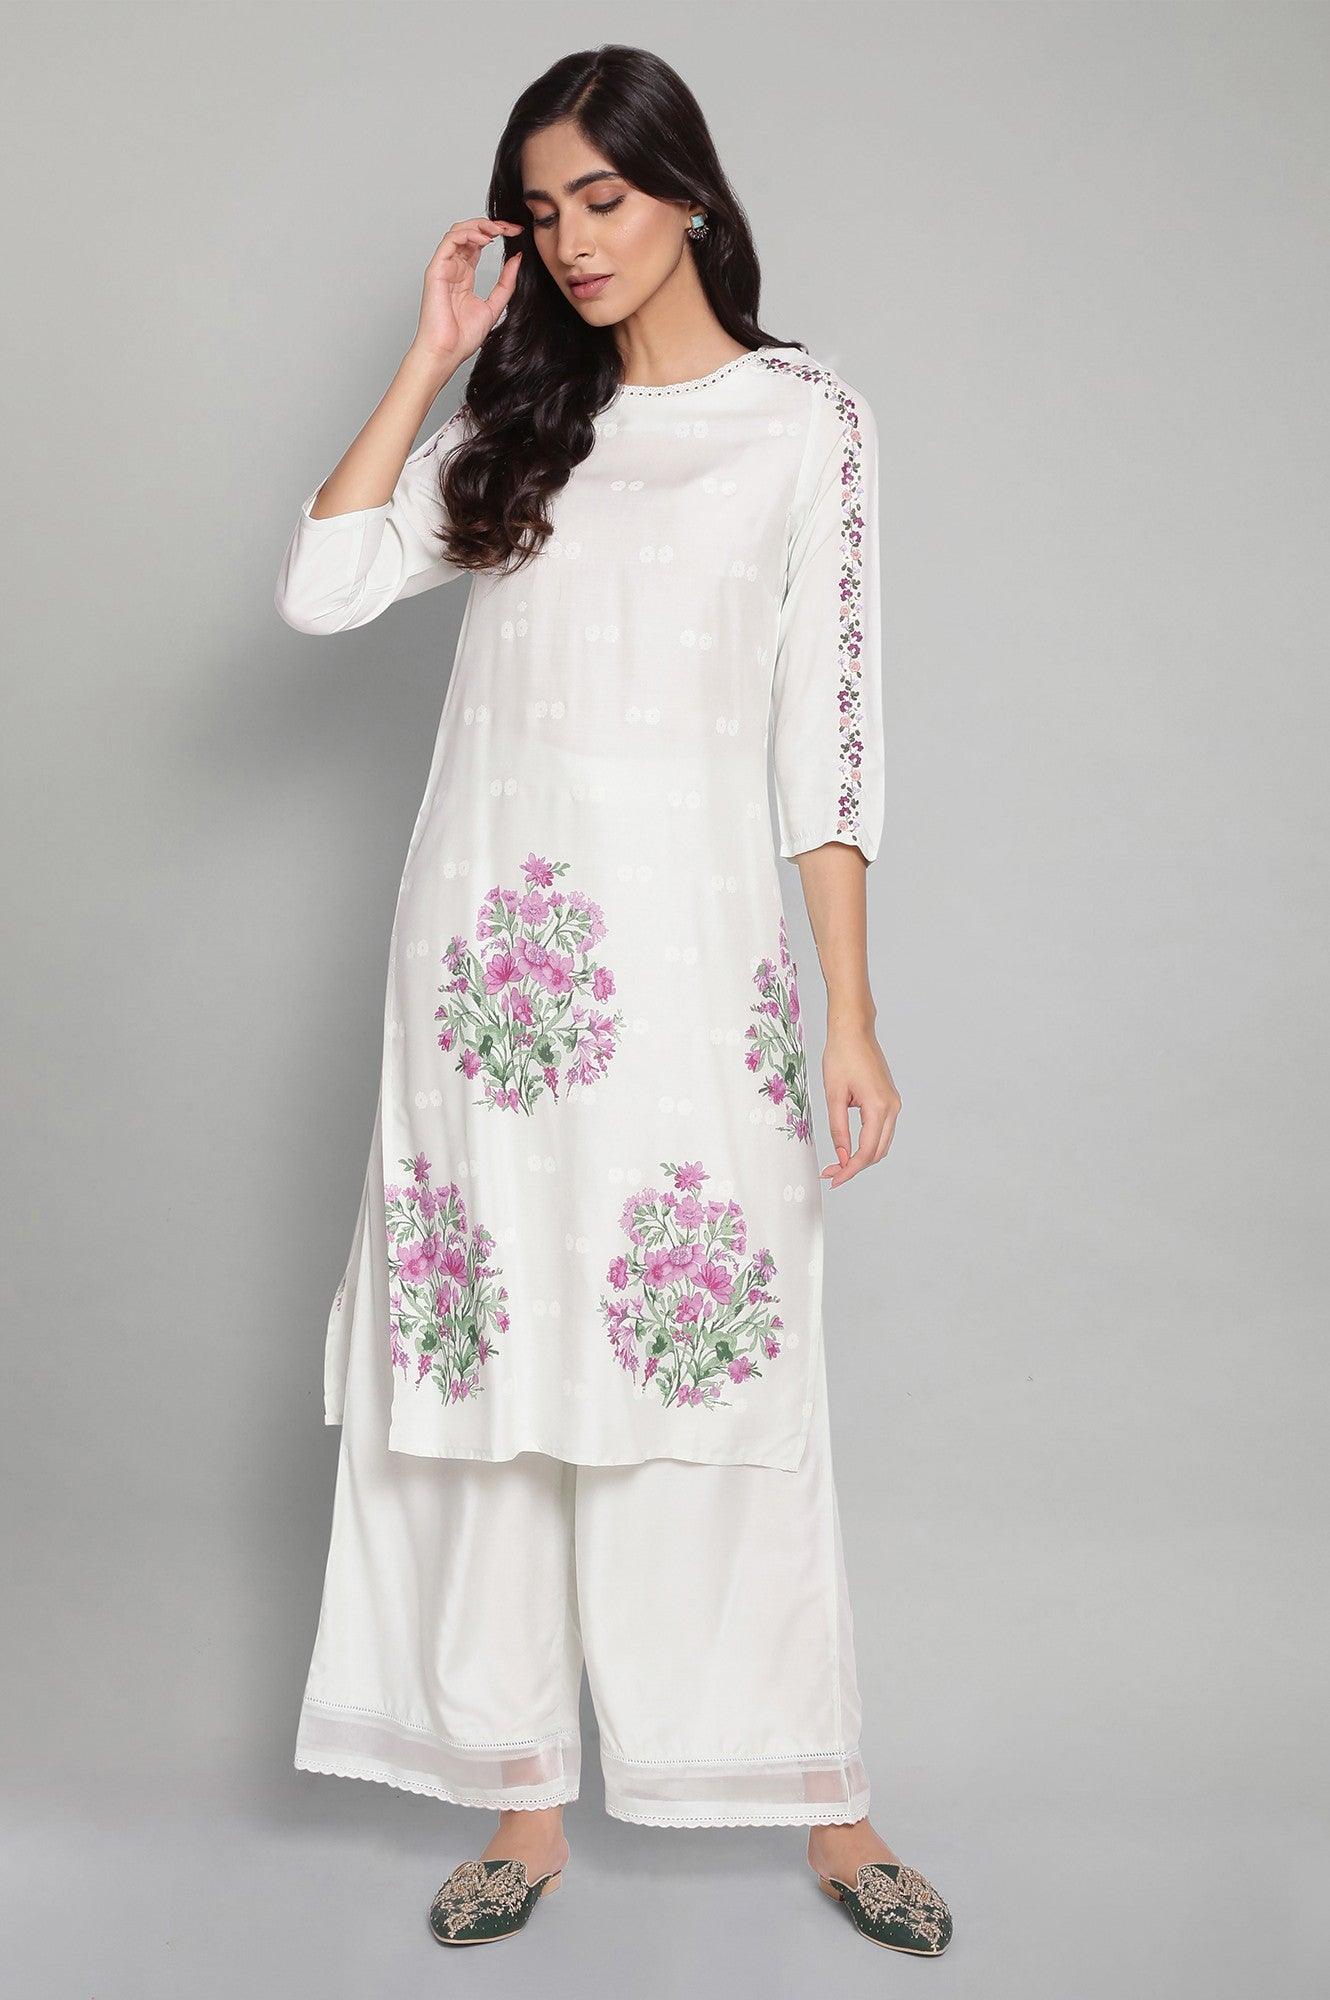 Light Blue Printed kurta with Embroidery and Lace - wforwoman